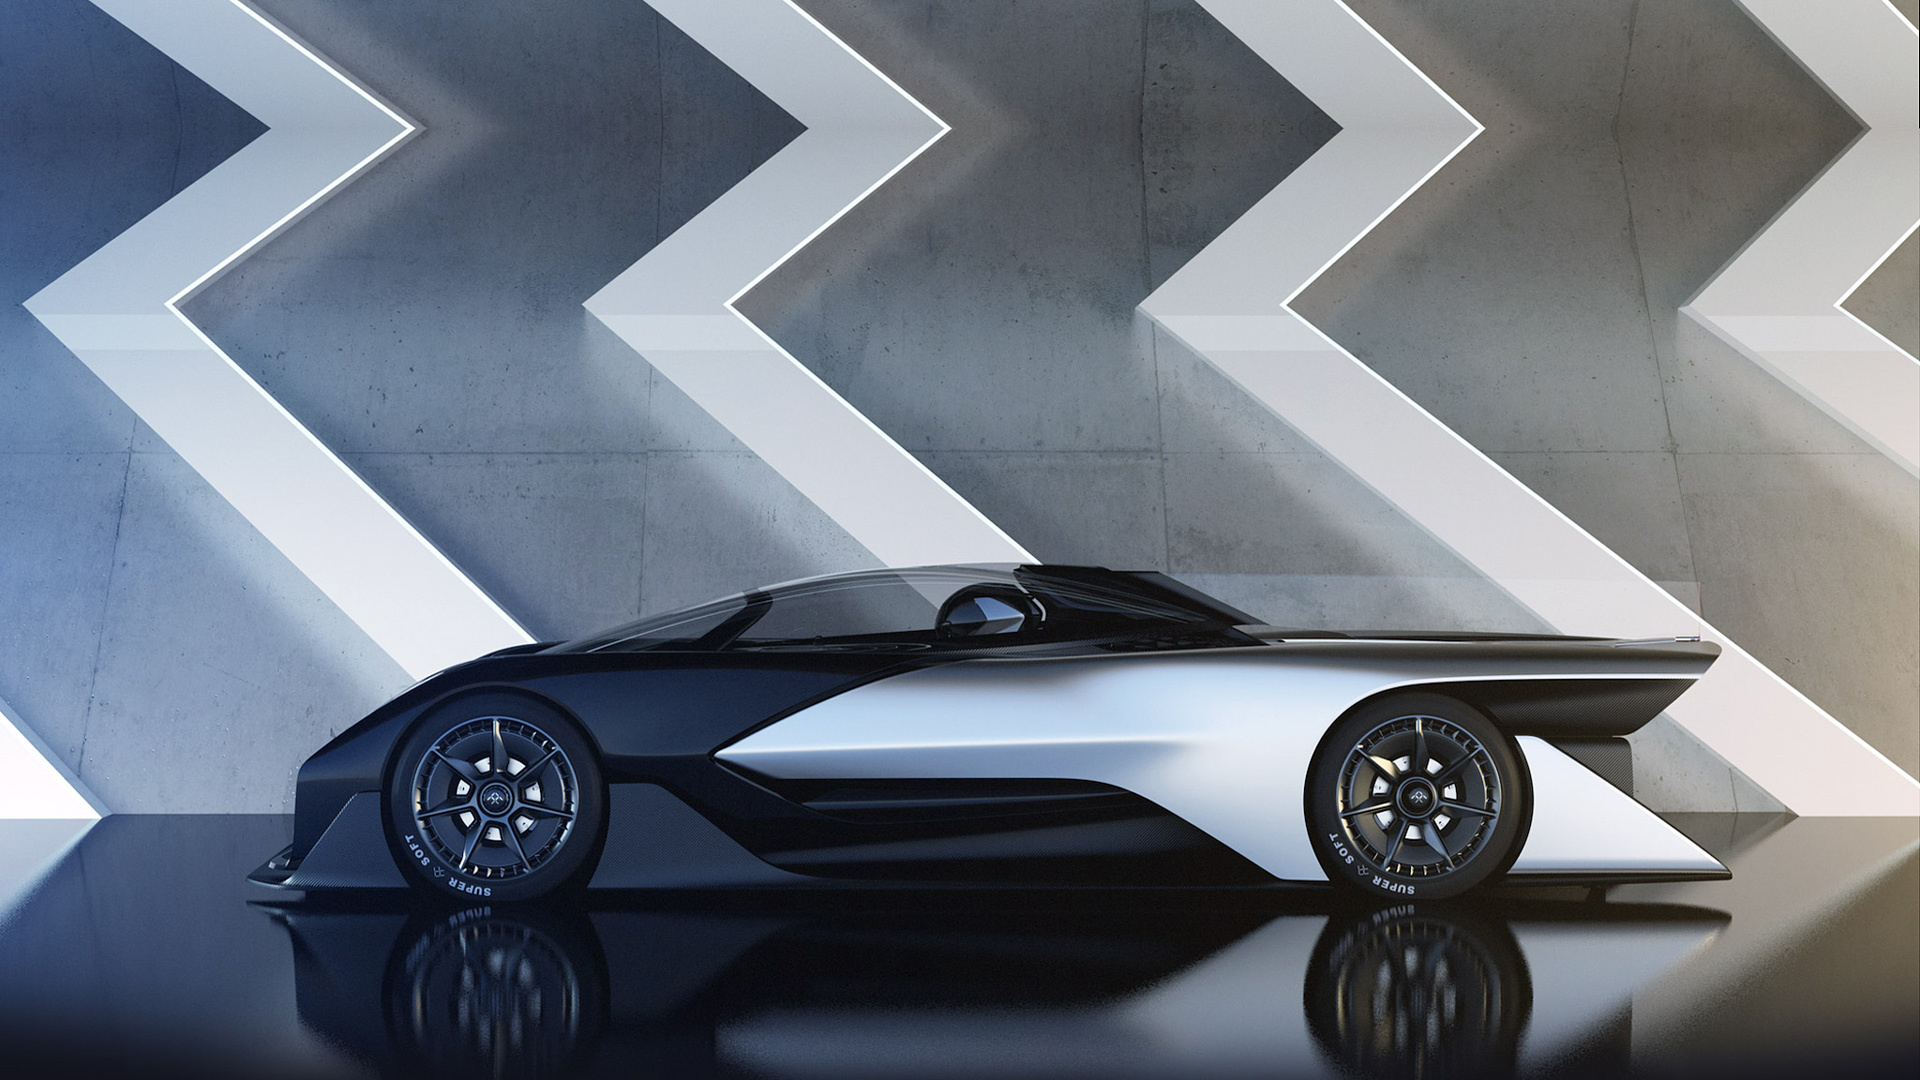 Free download FFzero1 images, Faraday Future concept, Electric car, Auto industry, 1920x1080 Full HD Desktop